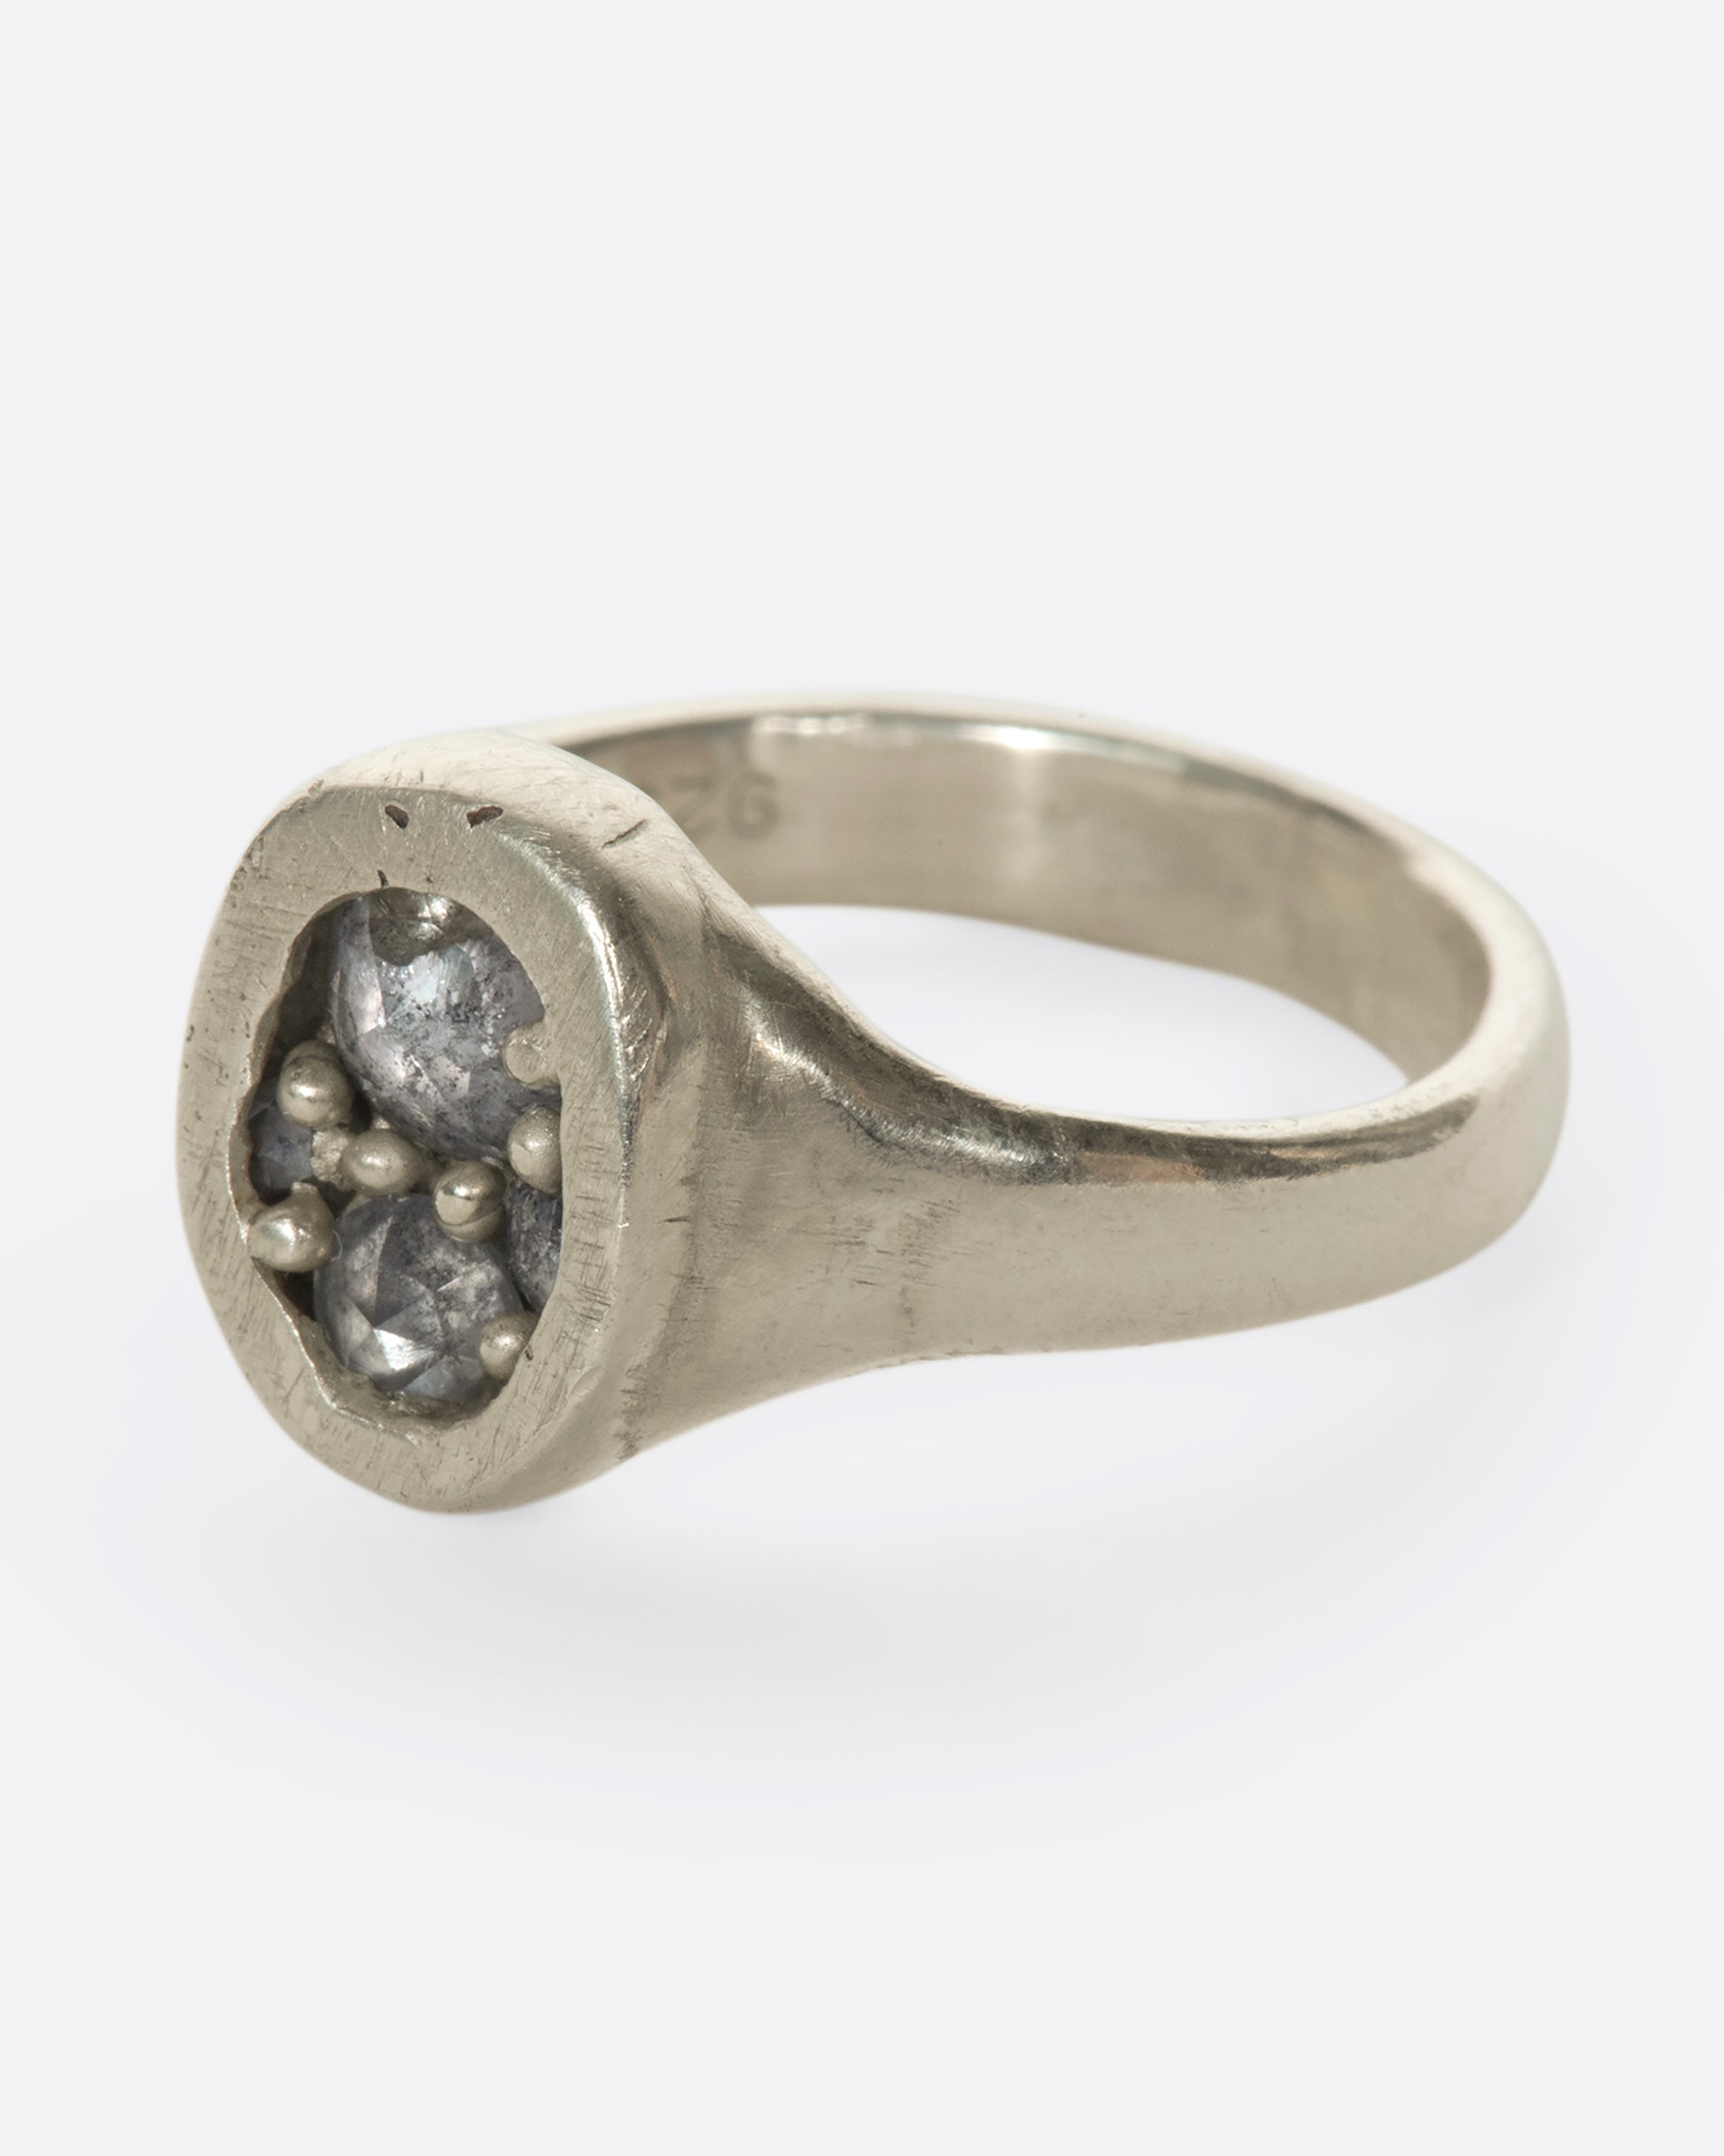 A left side view of an oval silver ring with grey diamonds.